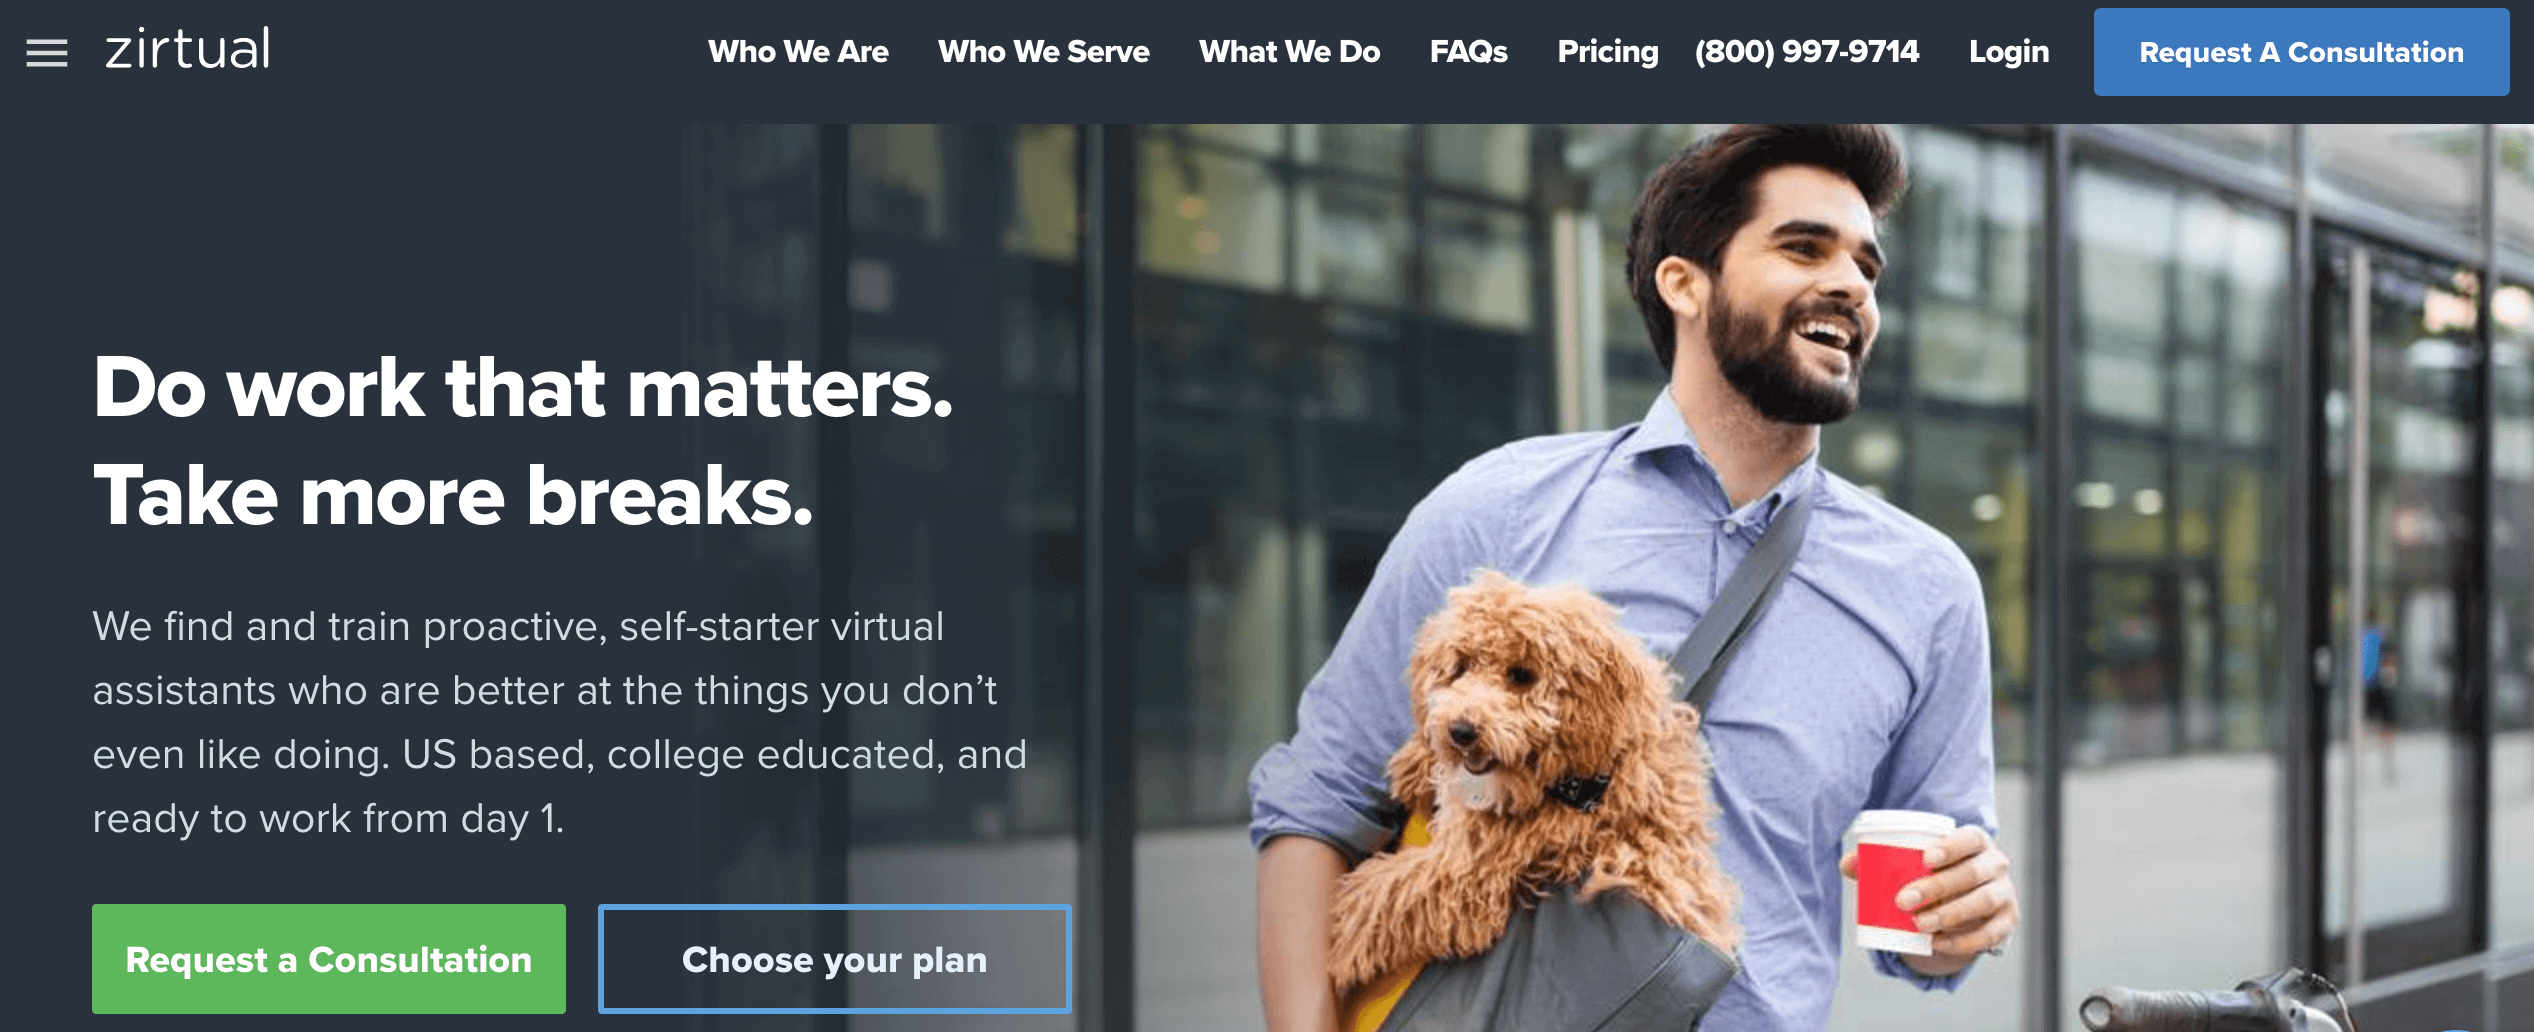 Zirtual homepage, a Virtual Assistant website, with options for requesting a consultation and choose plan with pricing, along with a male carrying a dog in background